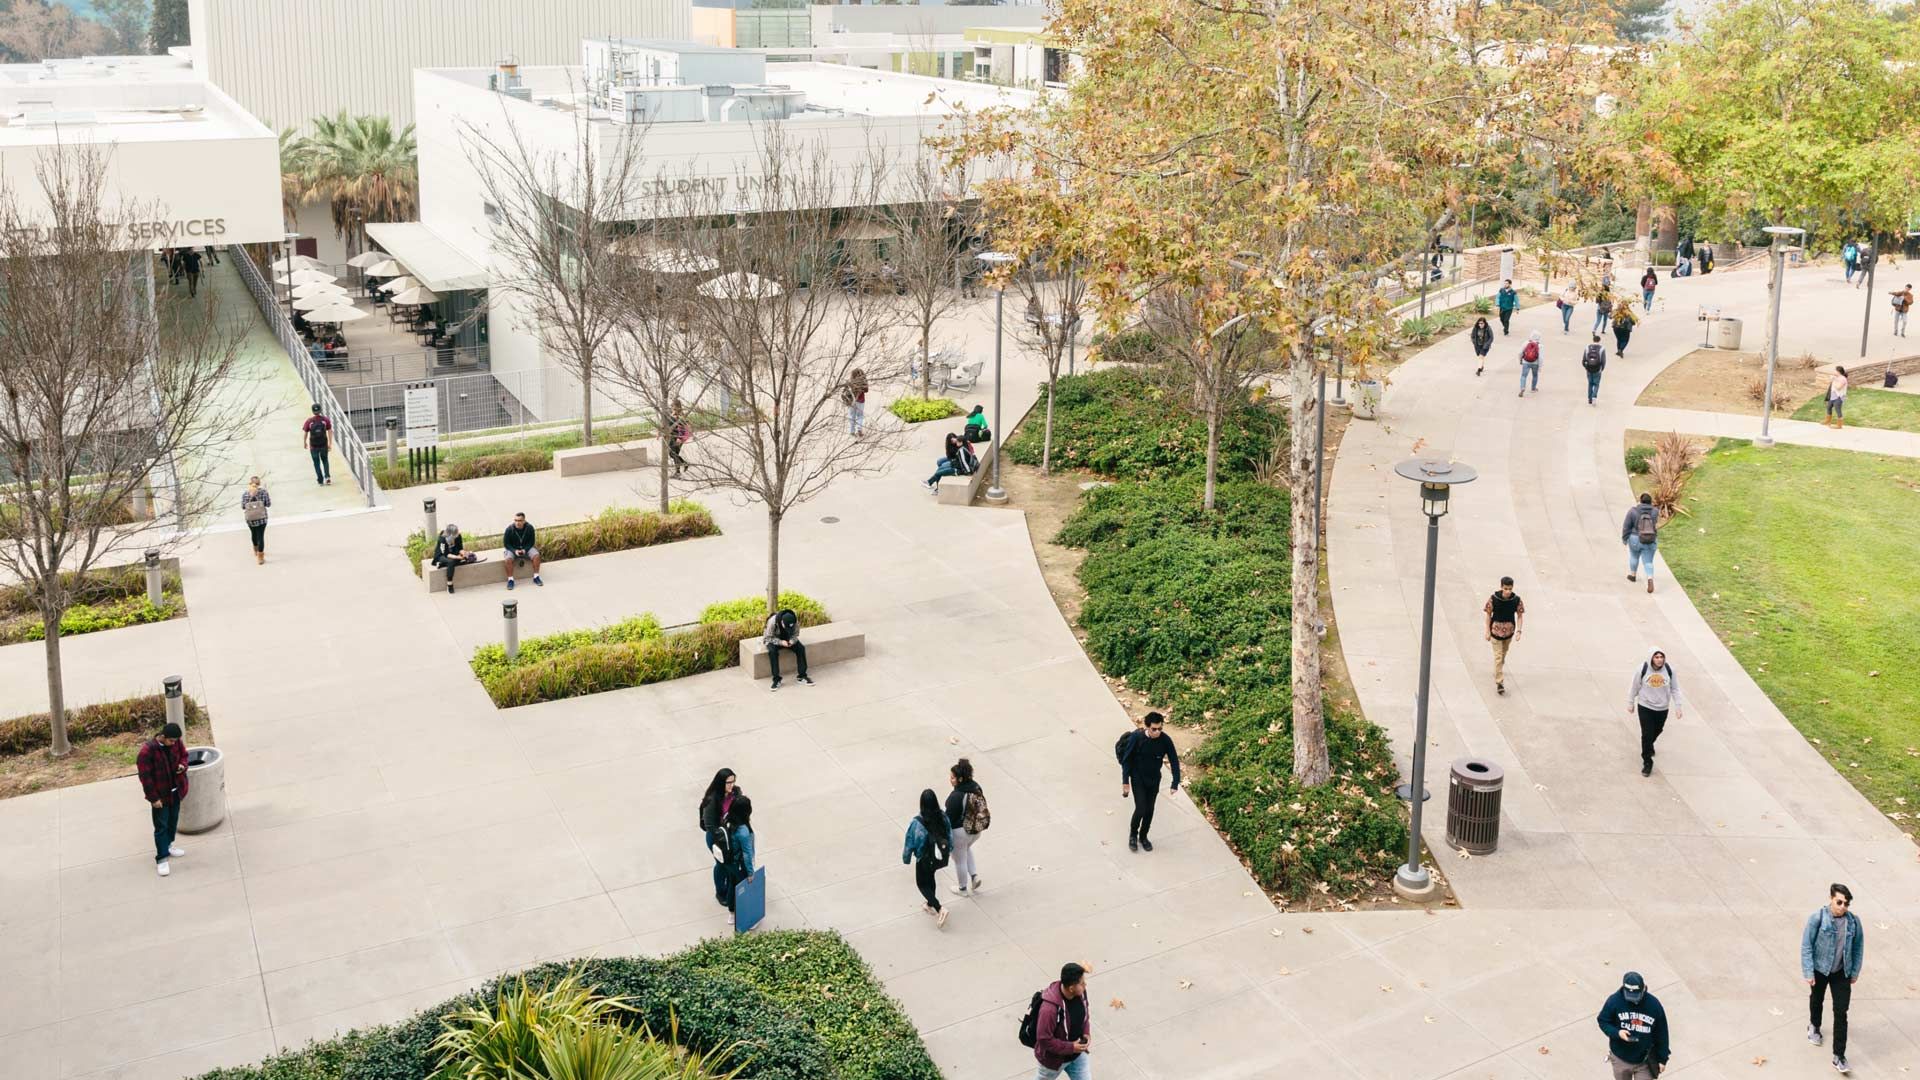 A university campus with green space and walkways populated by students wearing backpacks